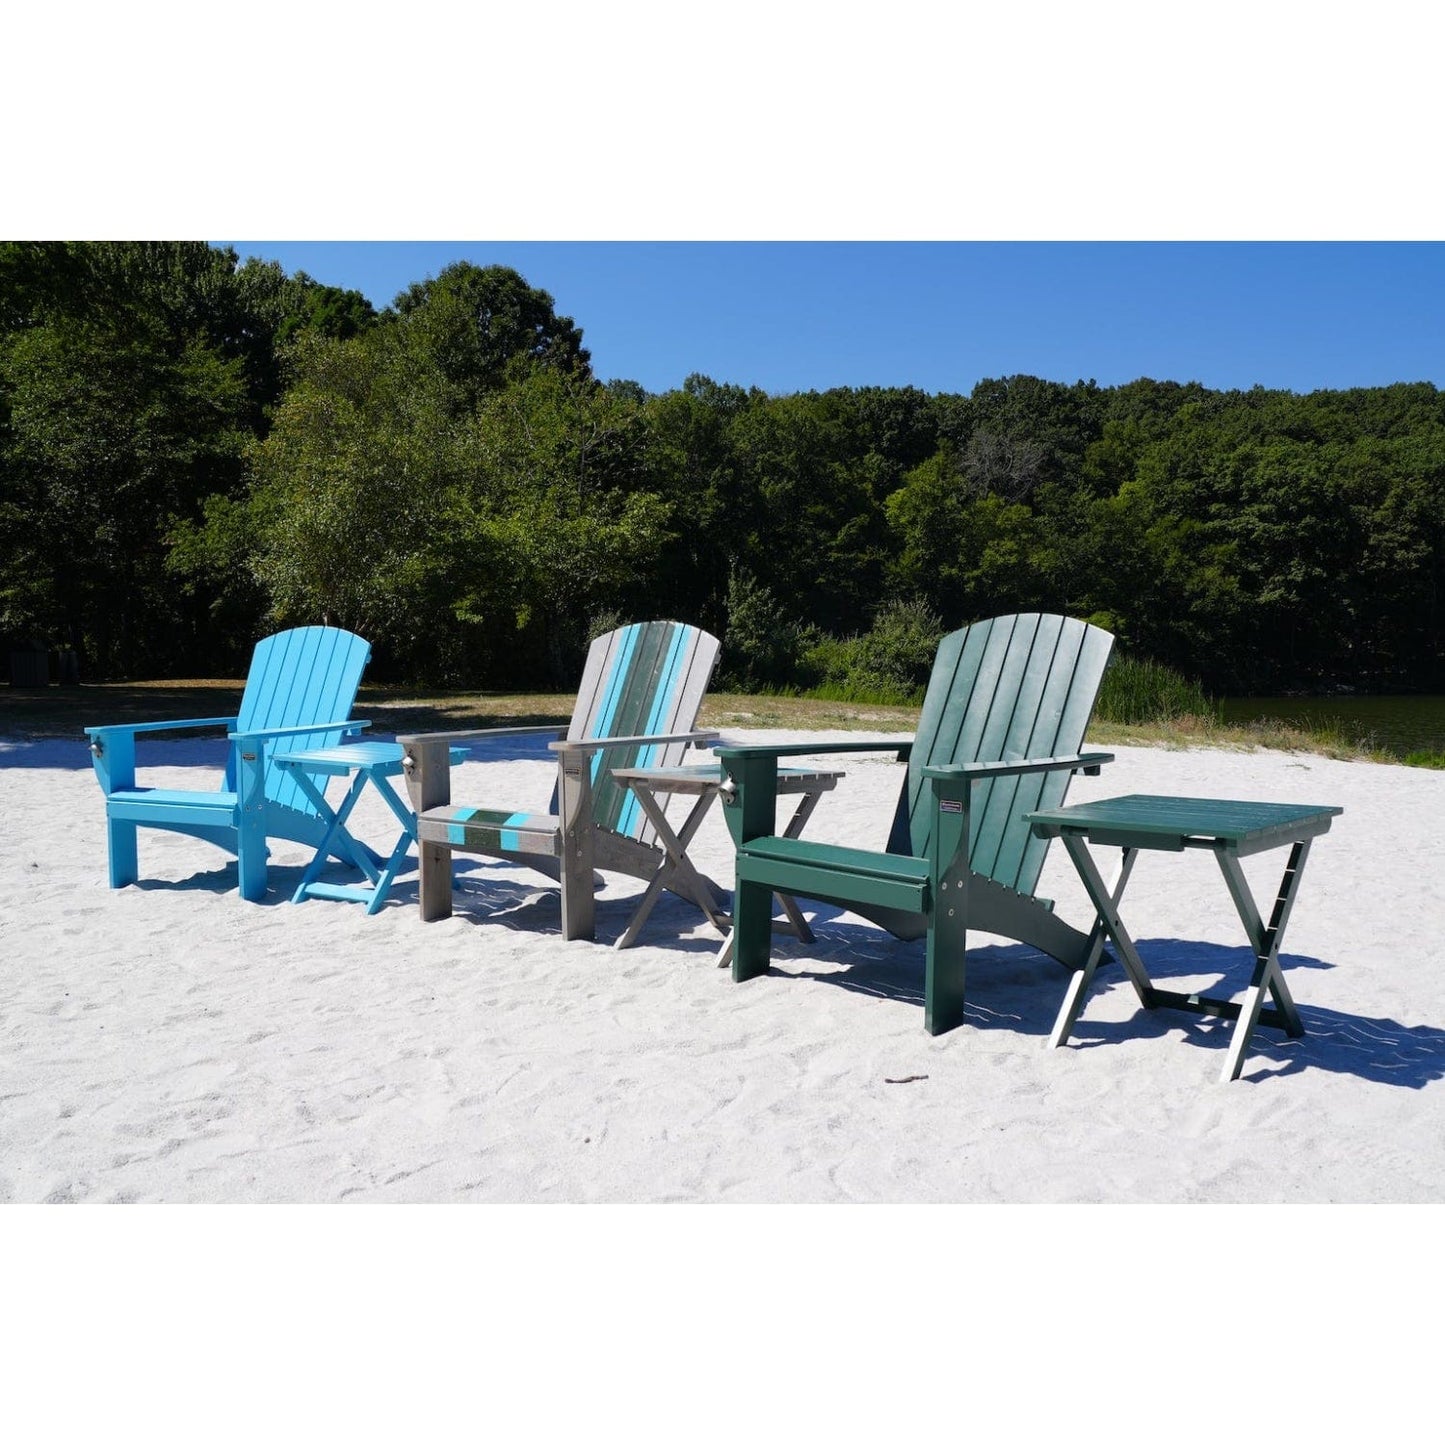 Riverstone Industries Outdoor Chairs Riverstone | Adirondack Chair with Side Table - Forest Green RSI-AC-HG-T